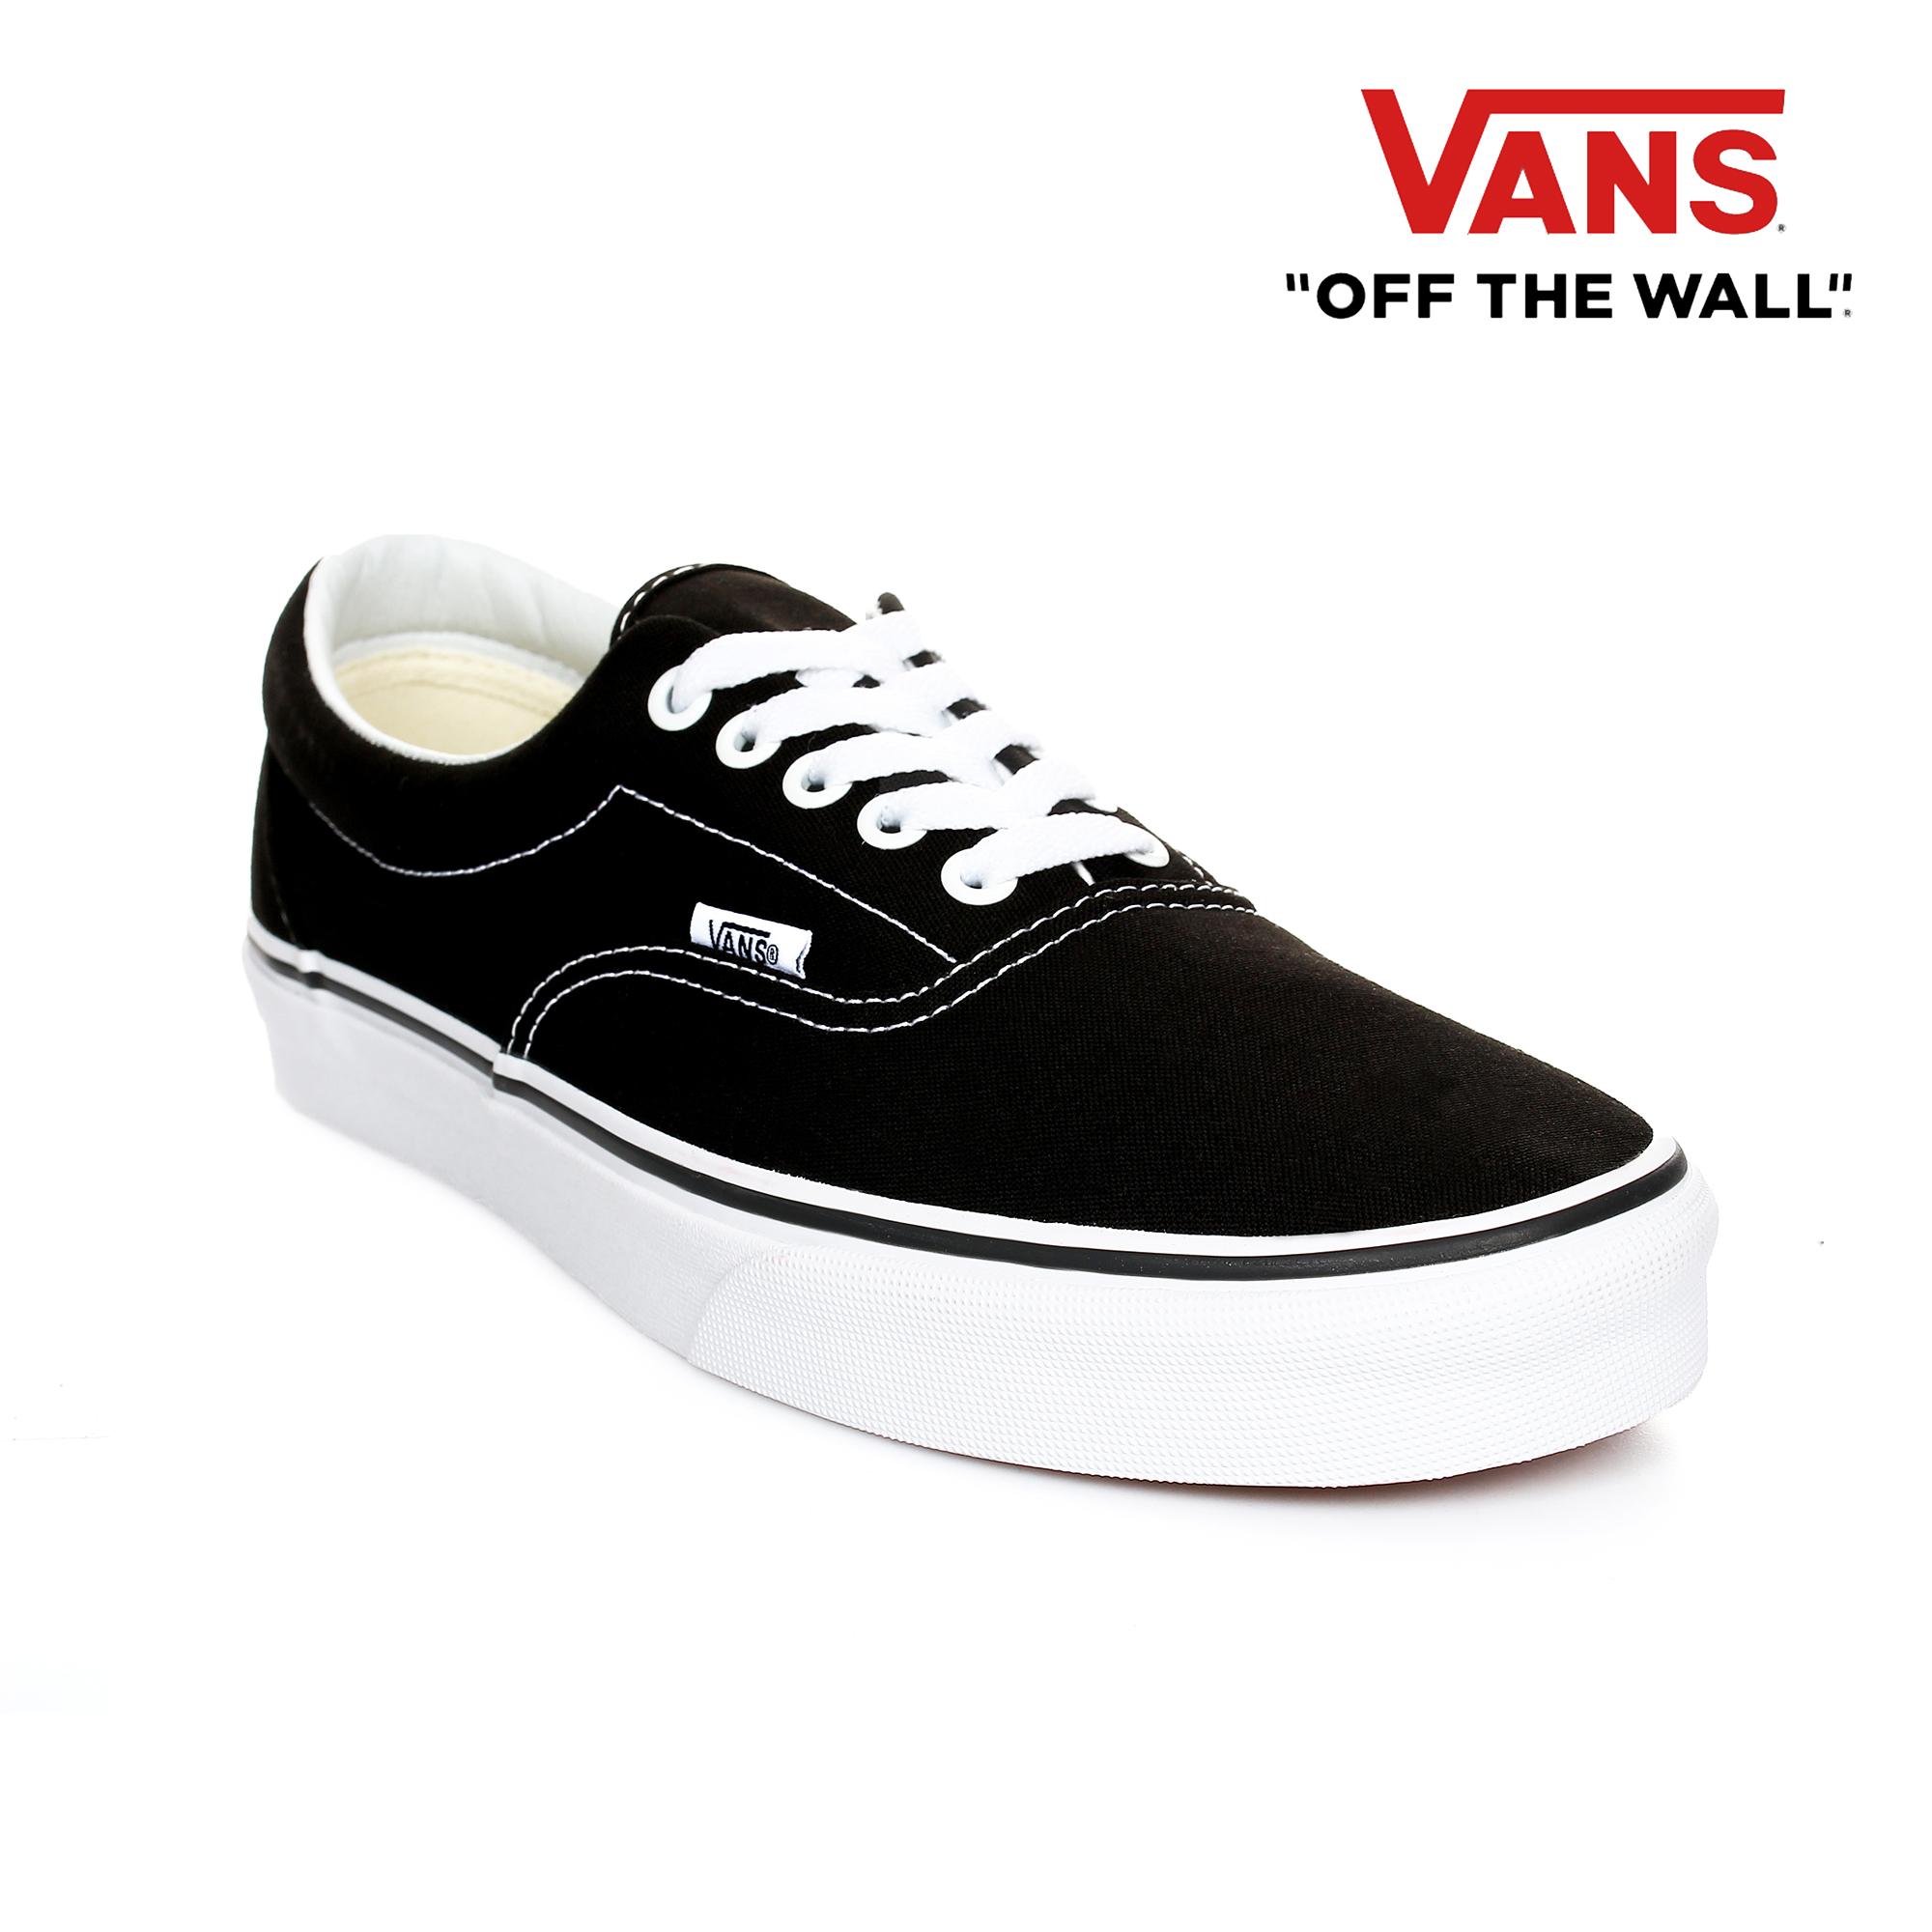 vans off the wall mens shoes - 60% OFF 